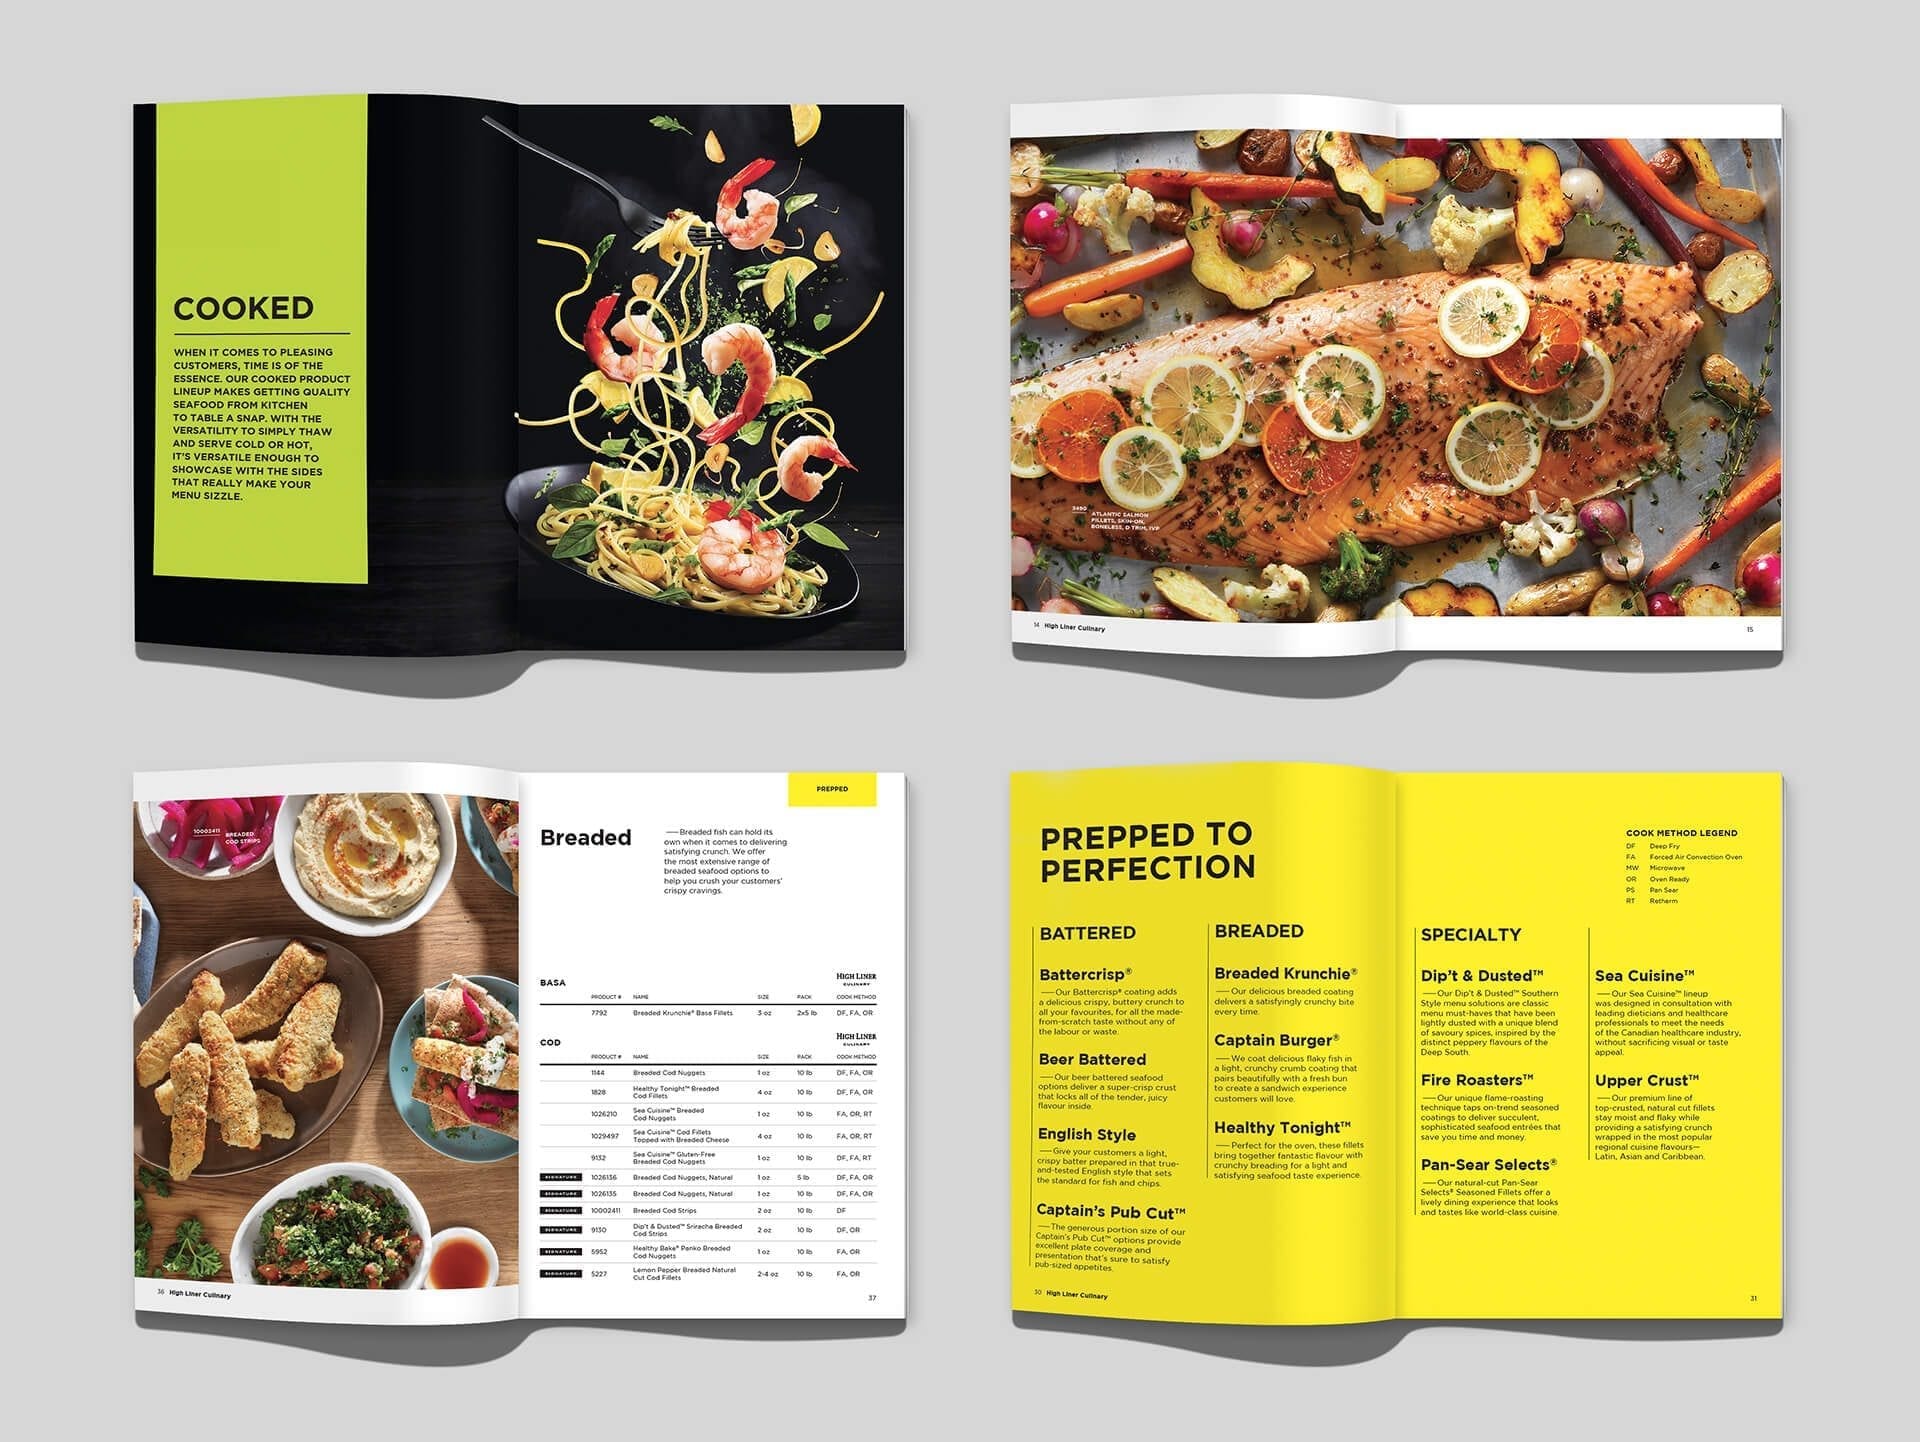 High Liner Culinary product catalog